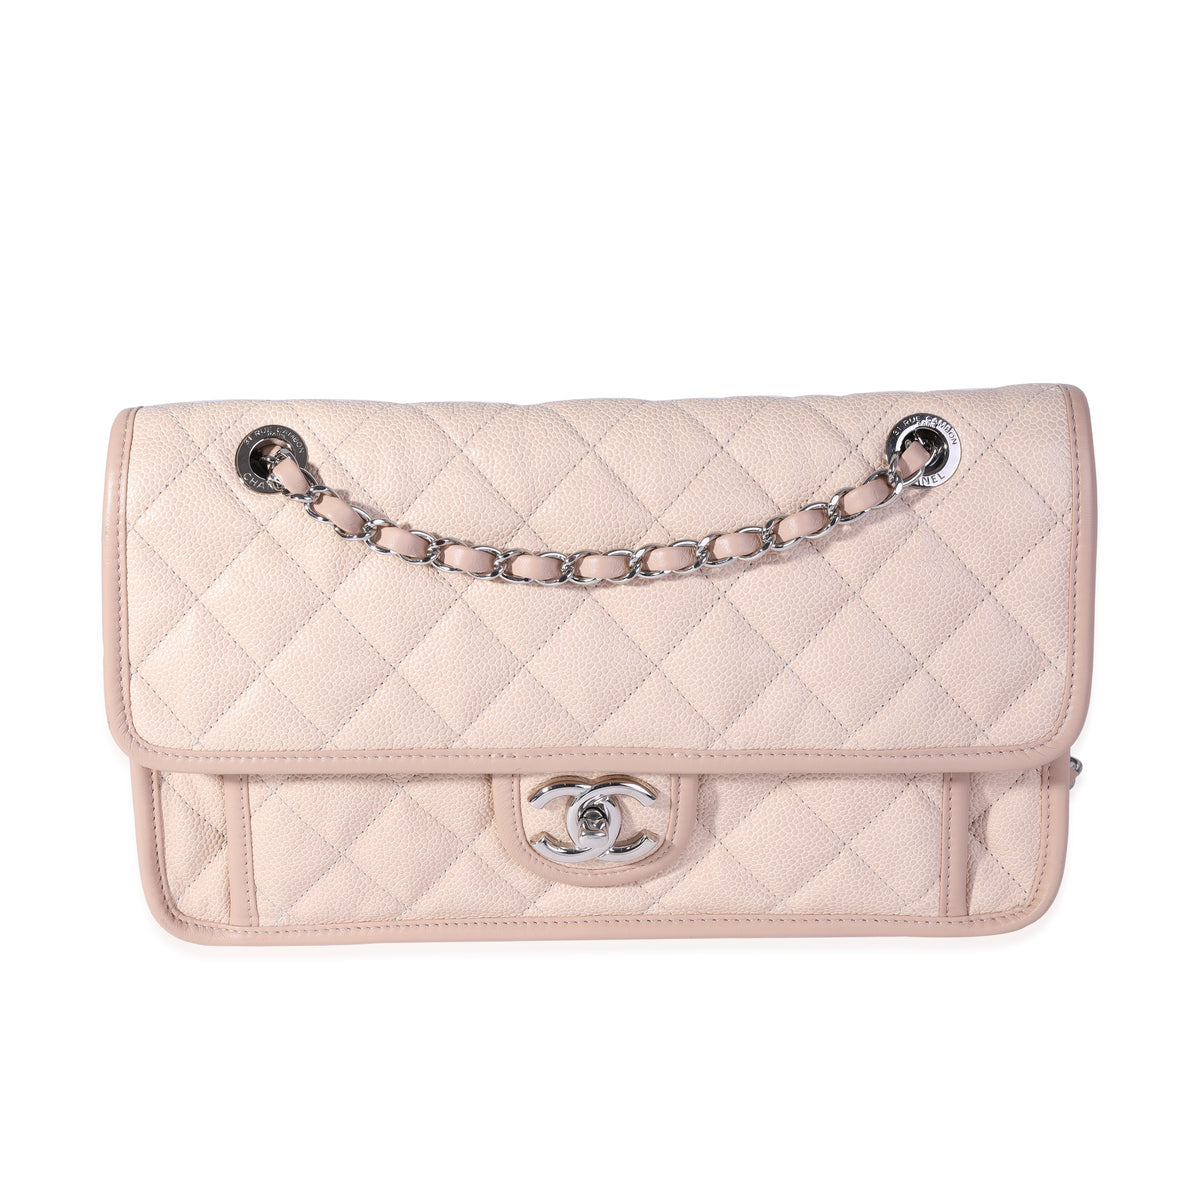 Chanel Beige Quilted Caviar French Riviera Medium Flap Bag